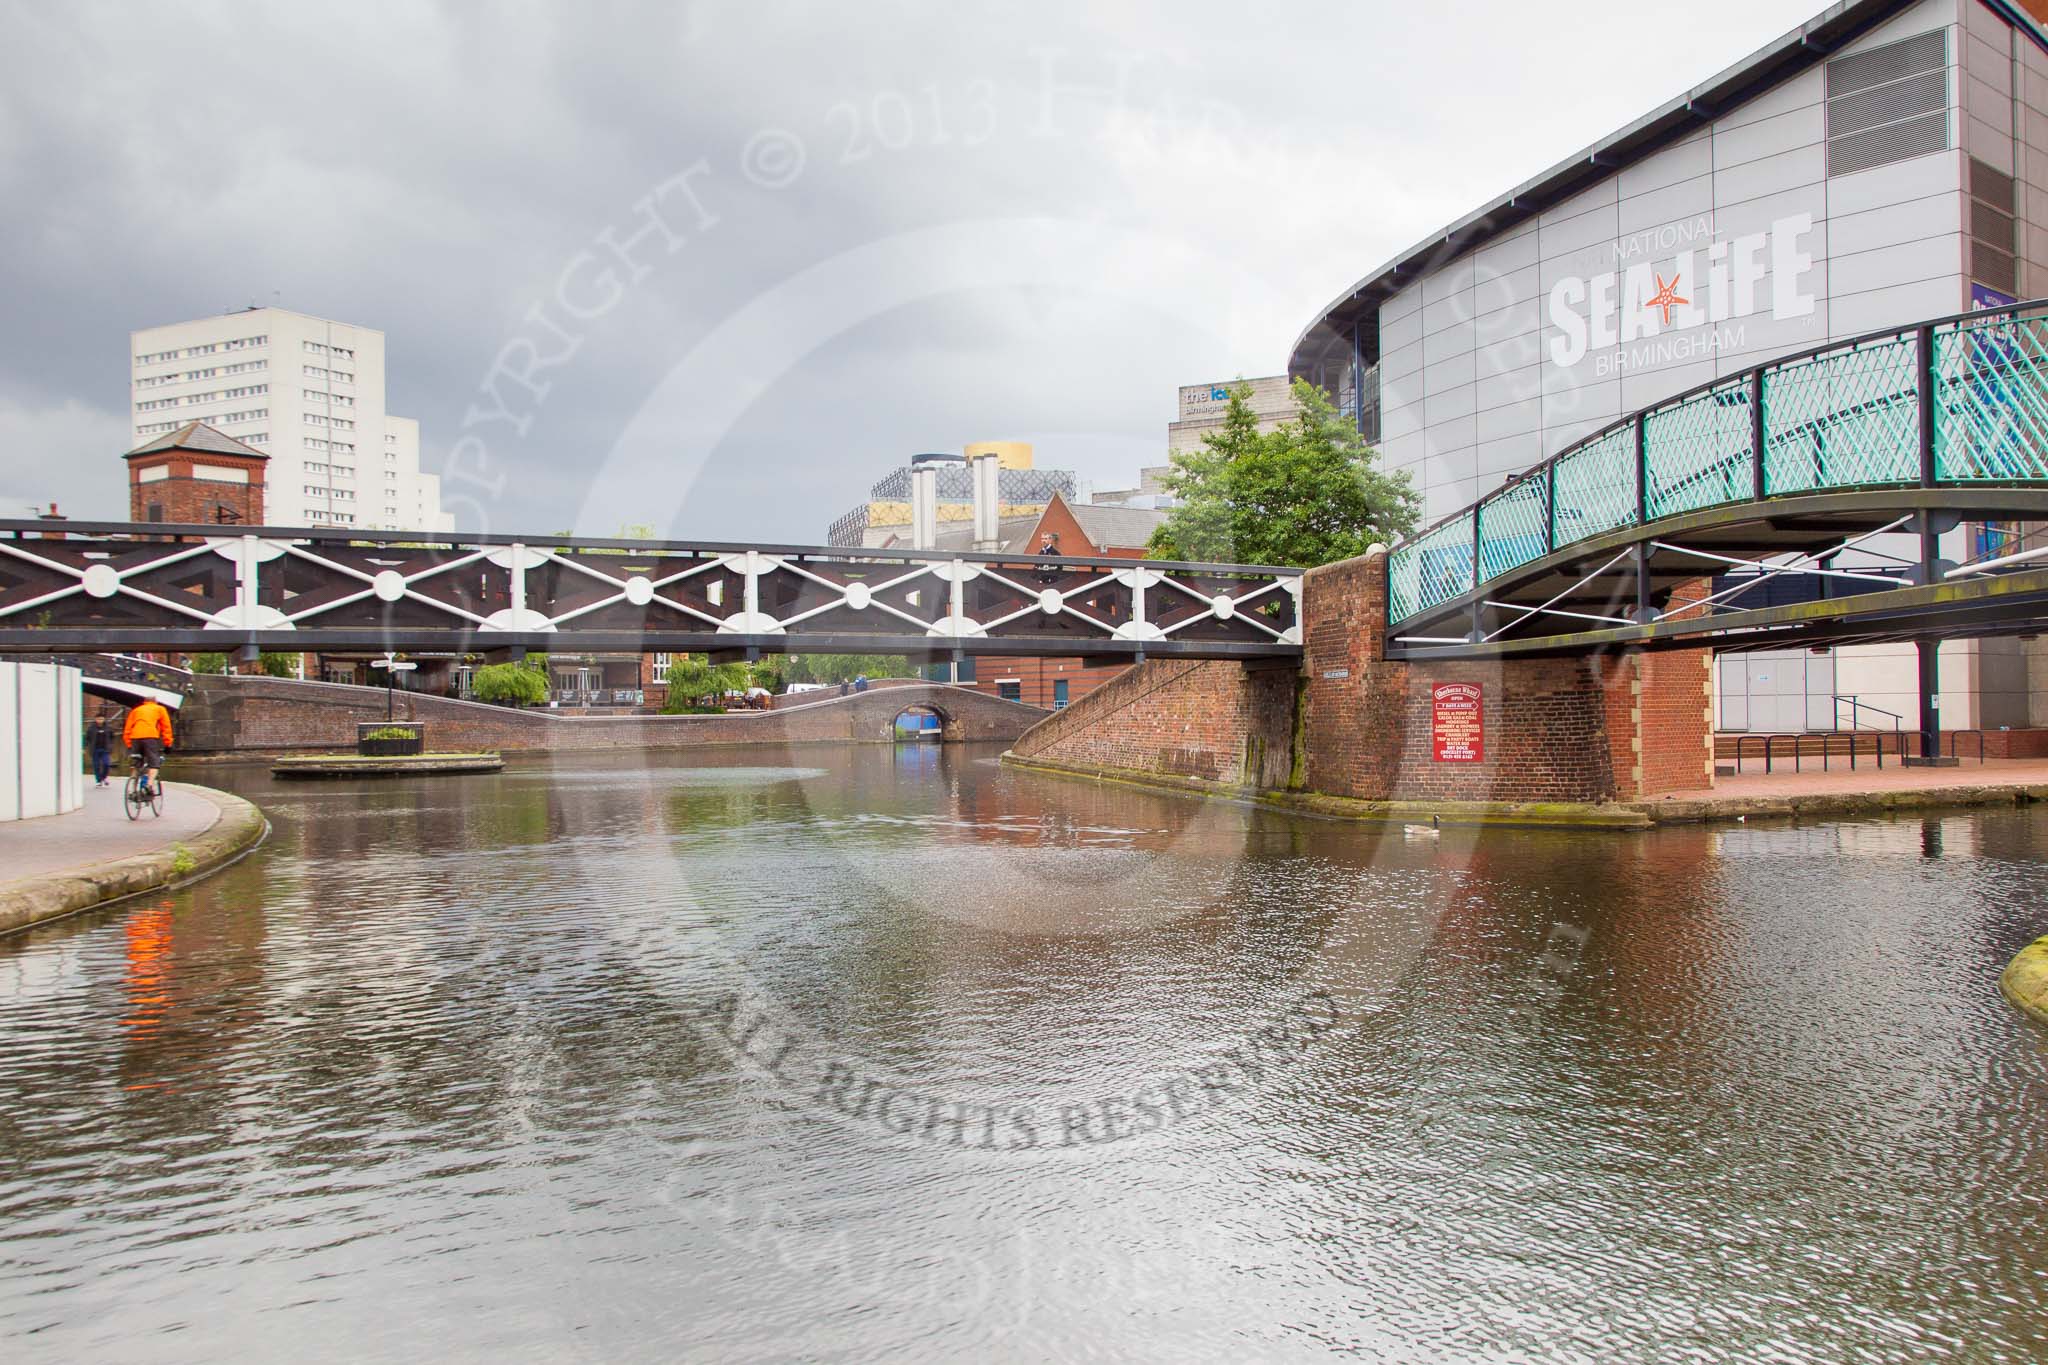 BCN Marathon Challenge 2014: Old Turn Junction on the BCN Main Line. On the right is Oozells Street Loop, Farmers Bridge Locks are on the left. The factory bridge centre right leads to Brewery Wharf.
Birmingham Canal Navigation,


United Kingdom,
on 23 May 2014 at 13:32, image #5